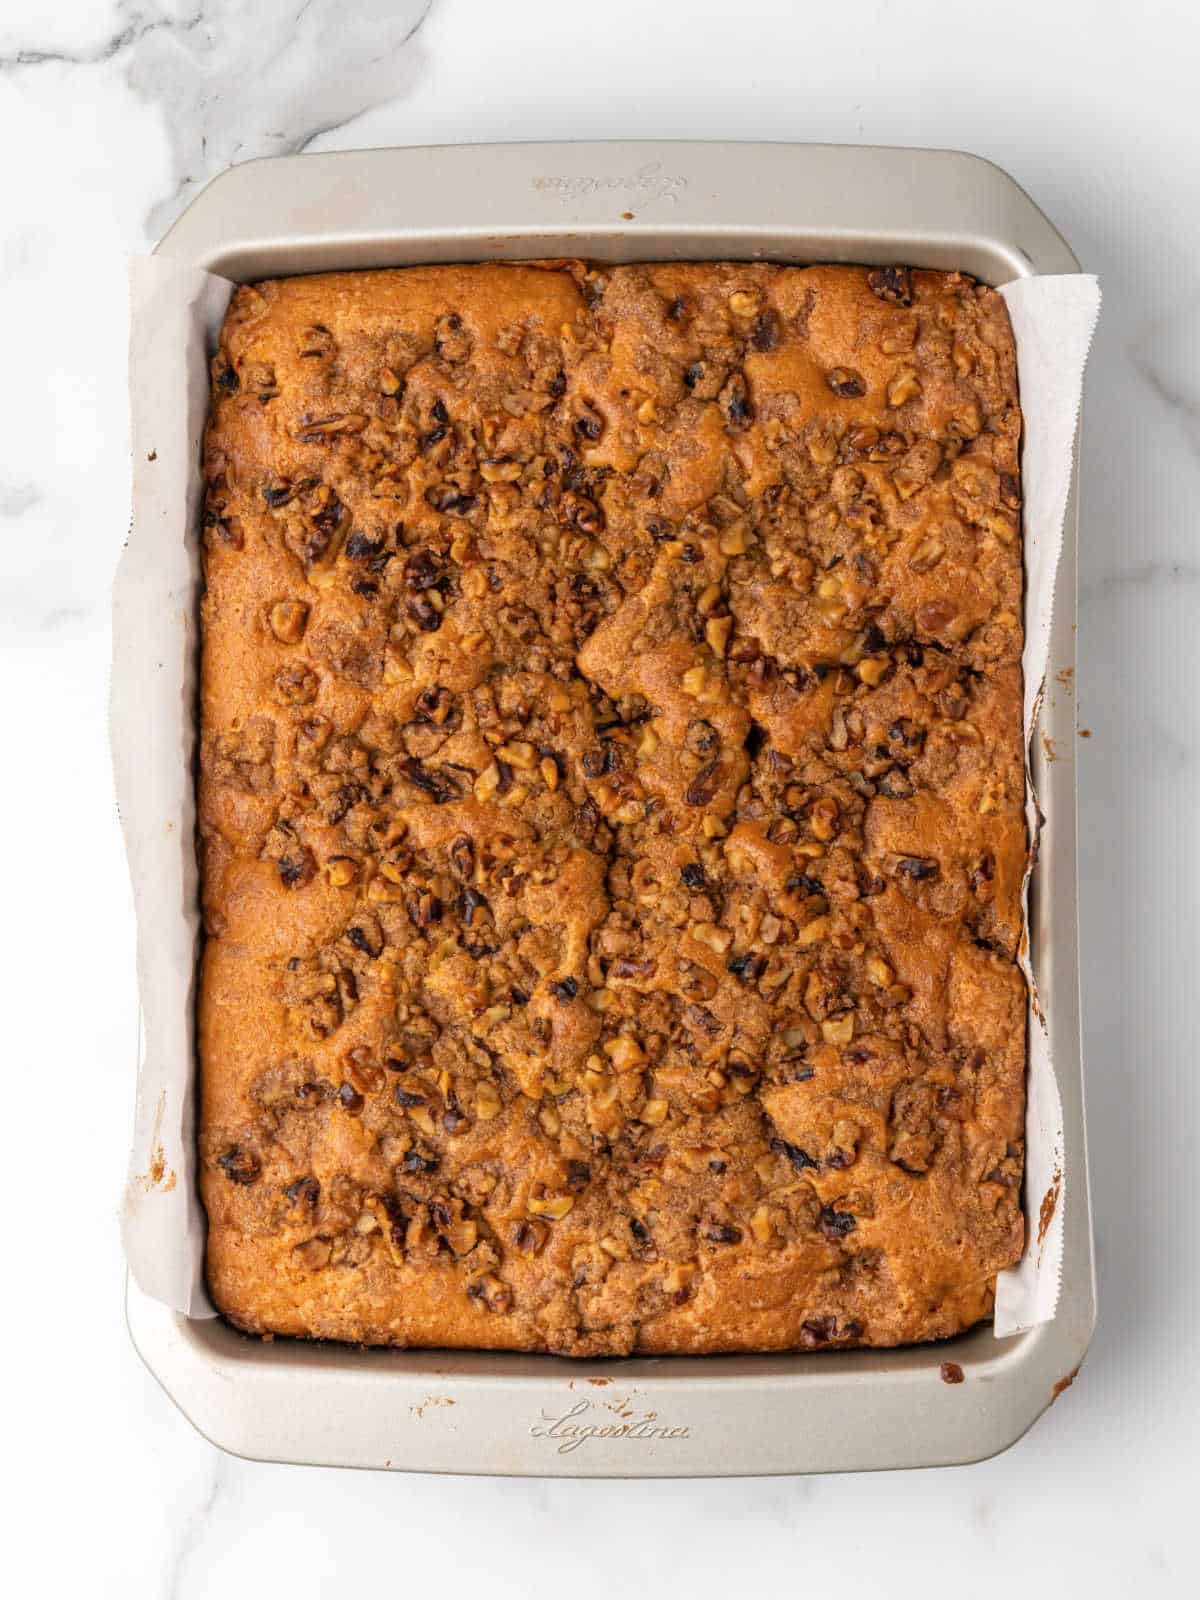 Baked cake with walnut topping on a metal rectangular pan placed on a white marble surface.